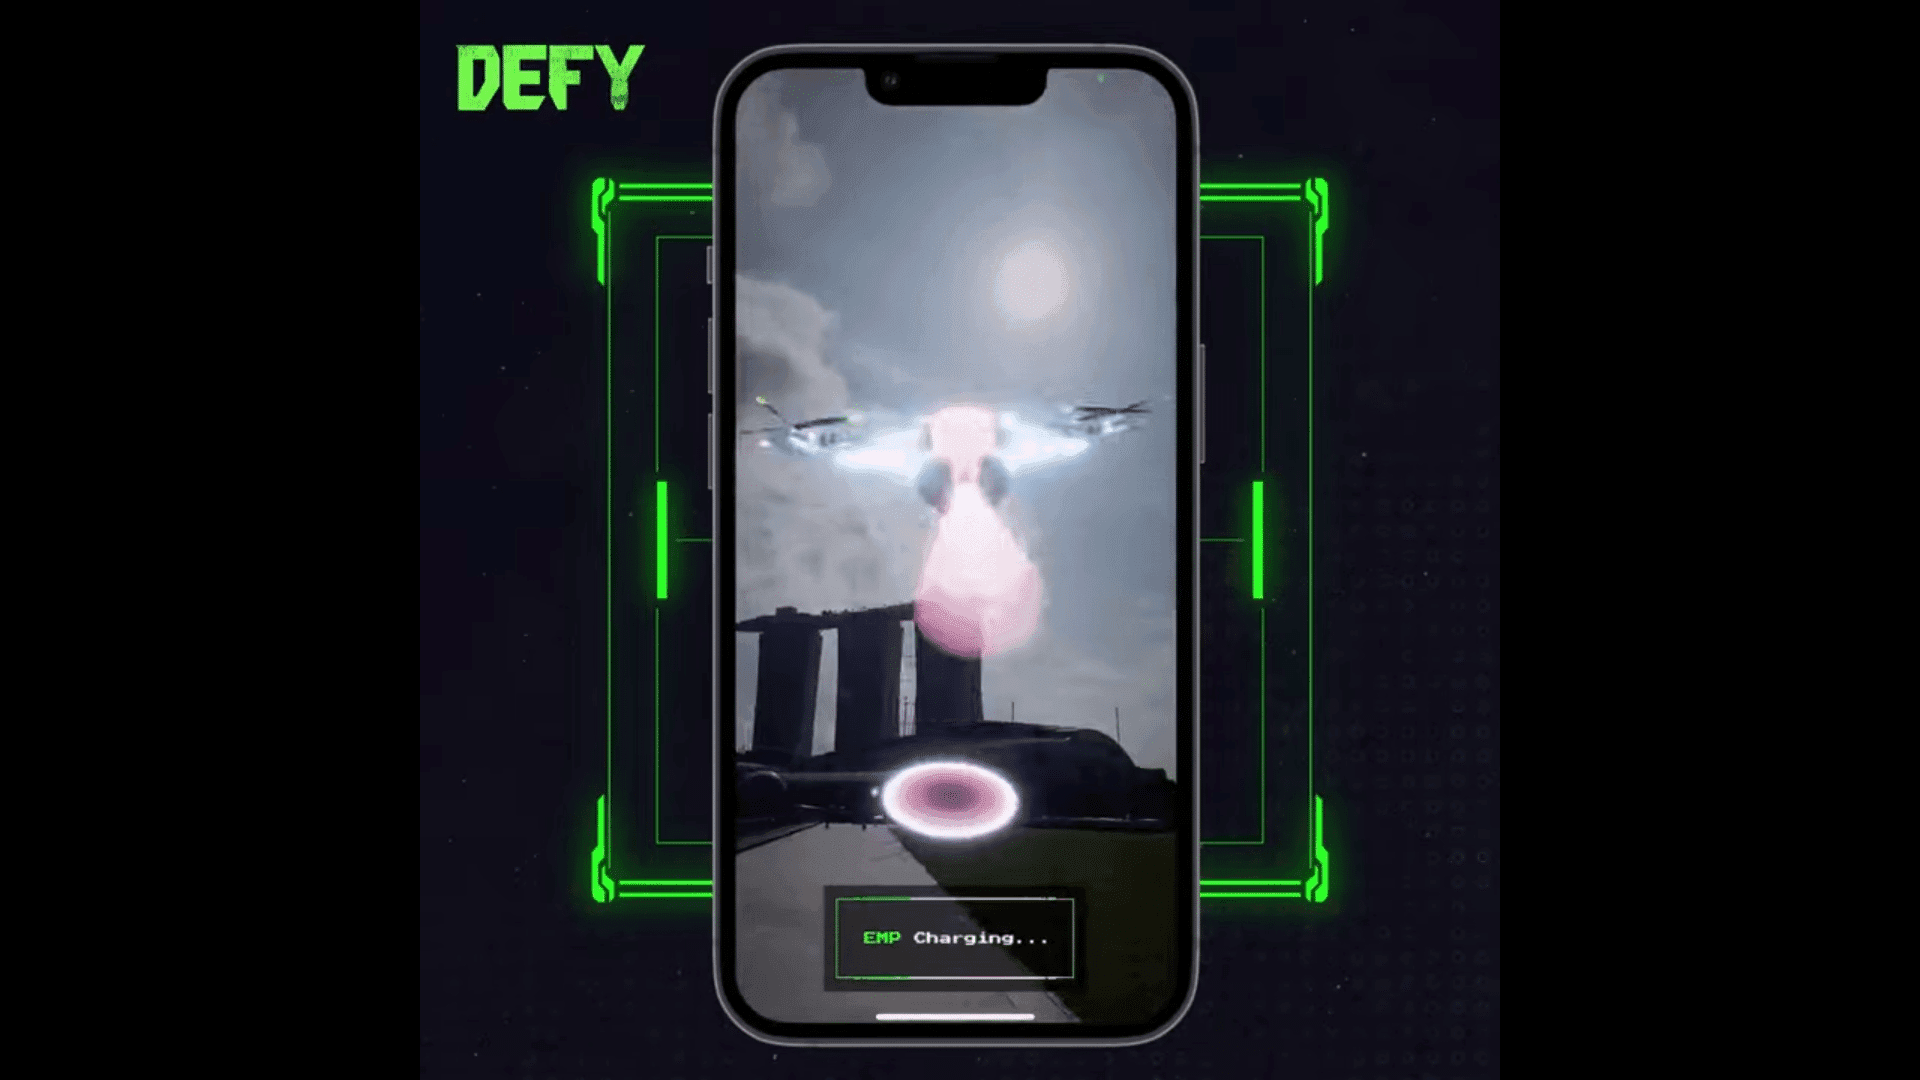 DEFY is a move-to-earn mobile game that combines elements of the virtual and physical worlds to provide an immersive metaverse experience.